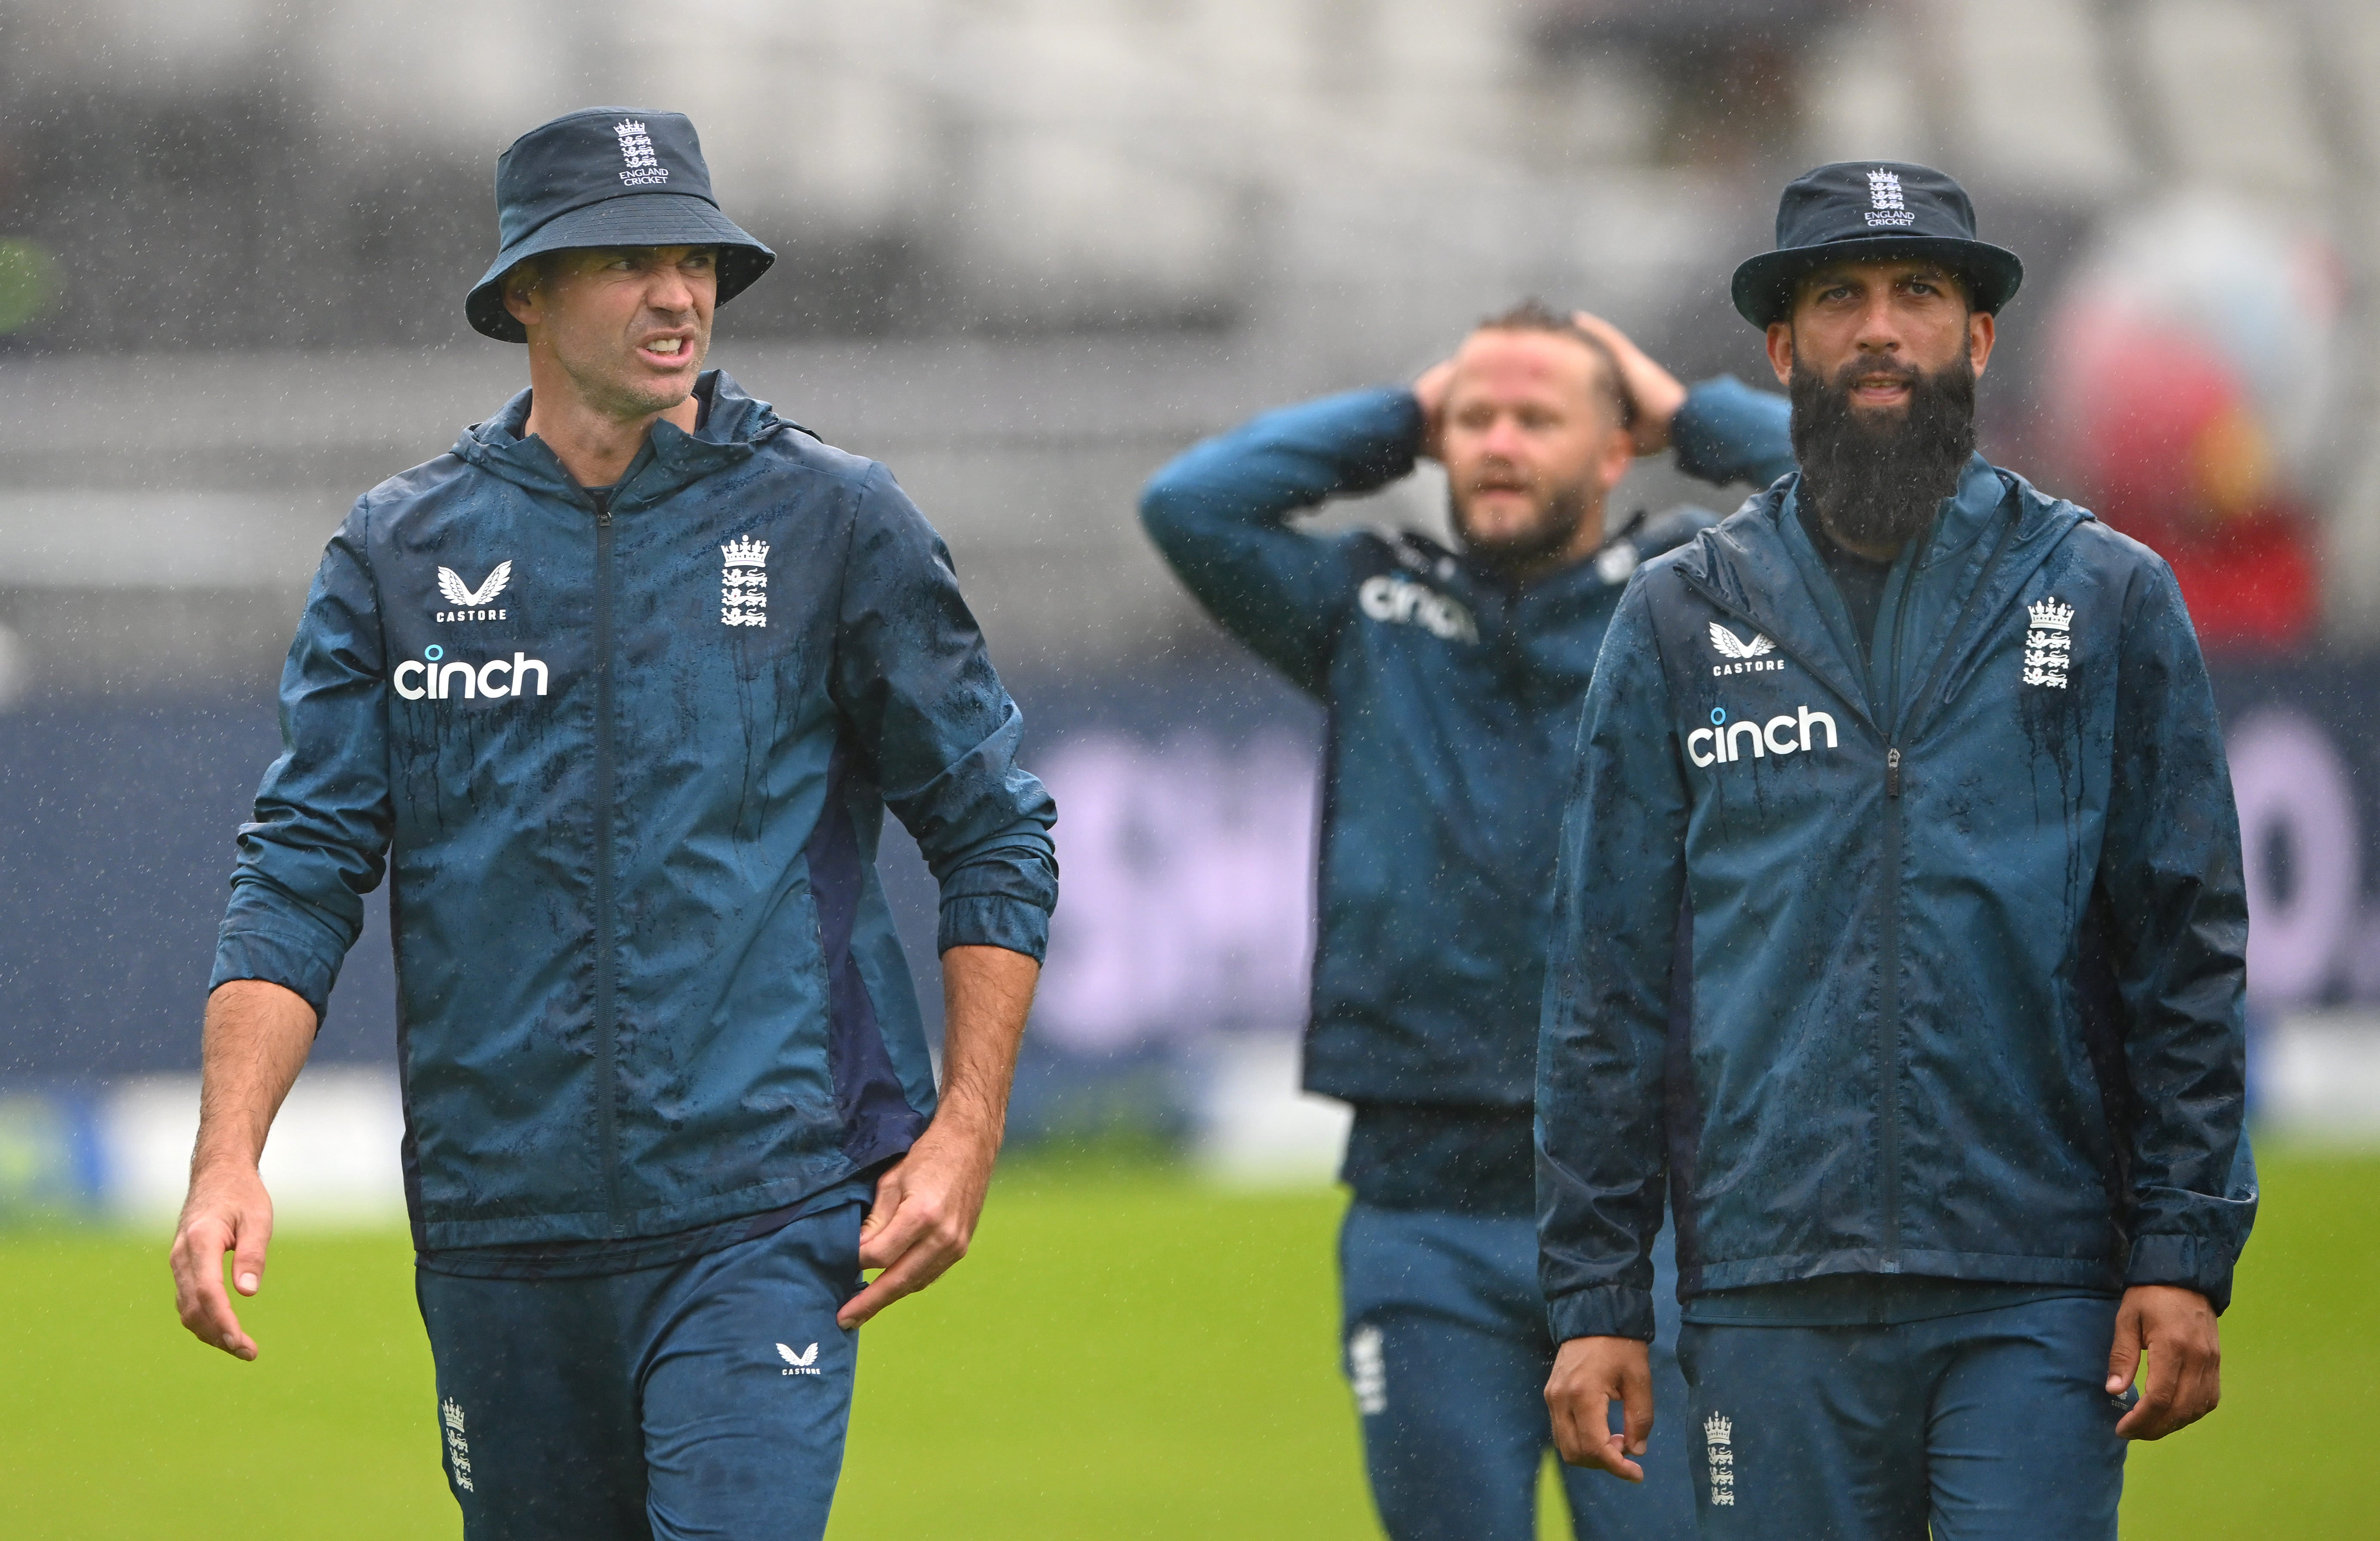 England’s hopes of taking the Ashes to a deciding Test were scuppered by the rain